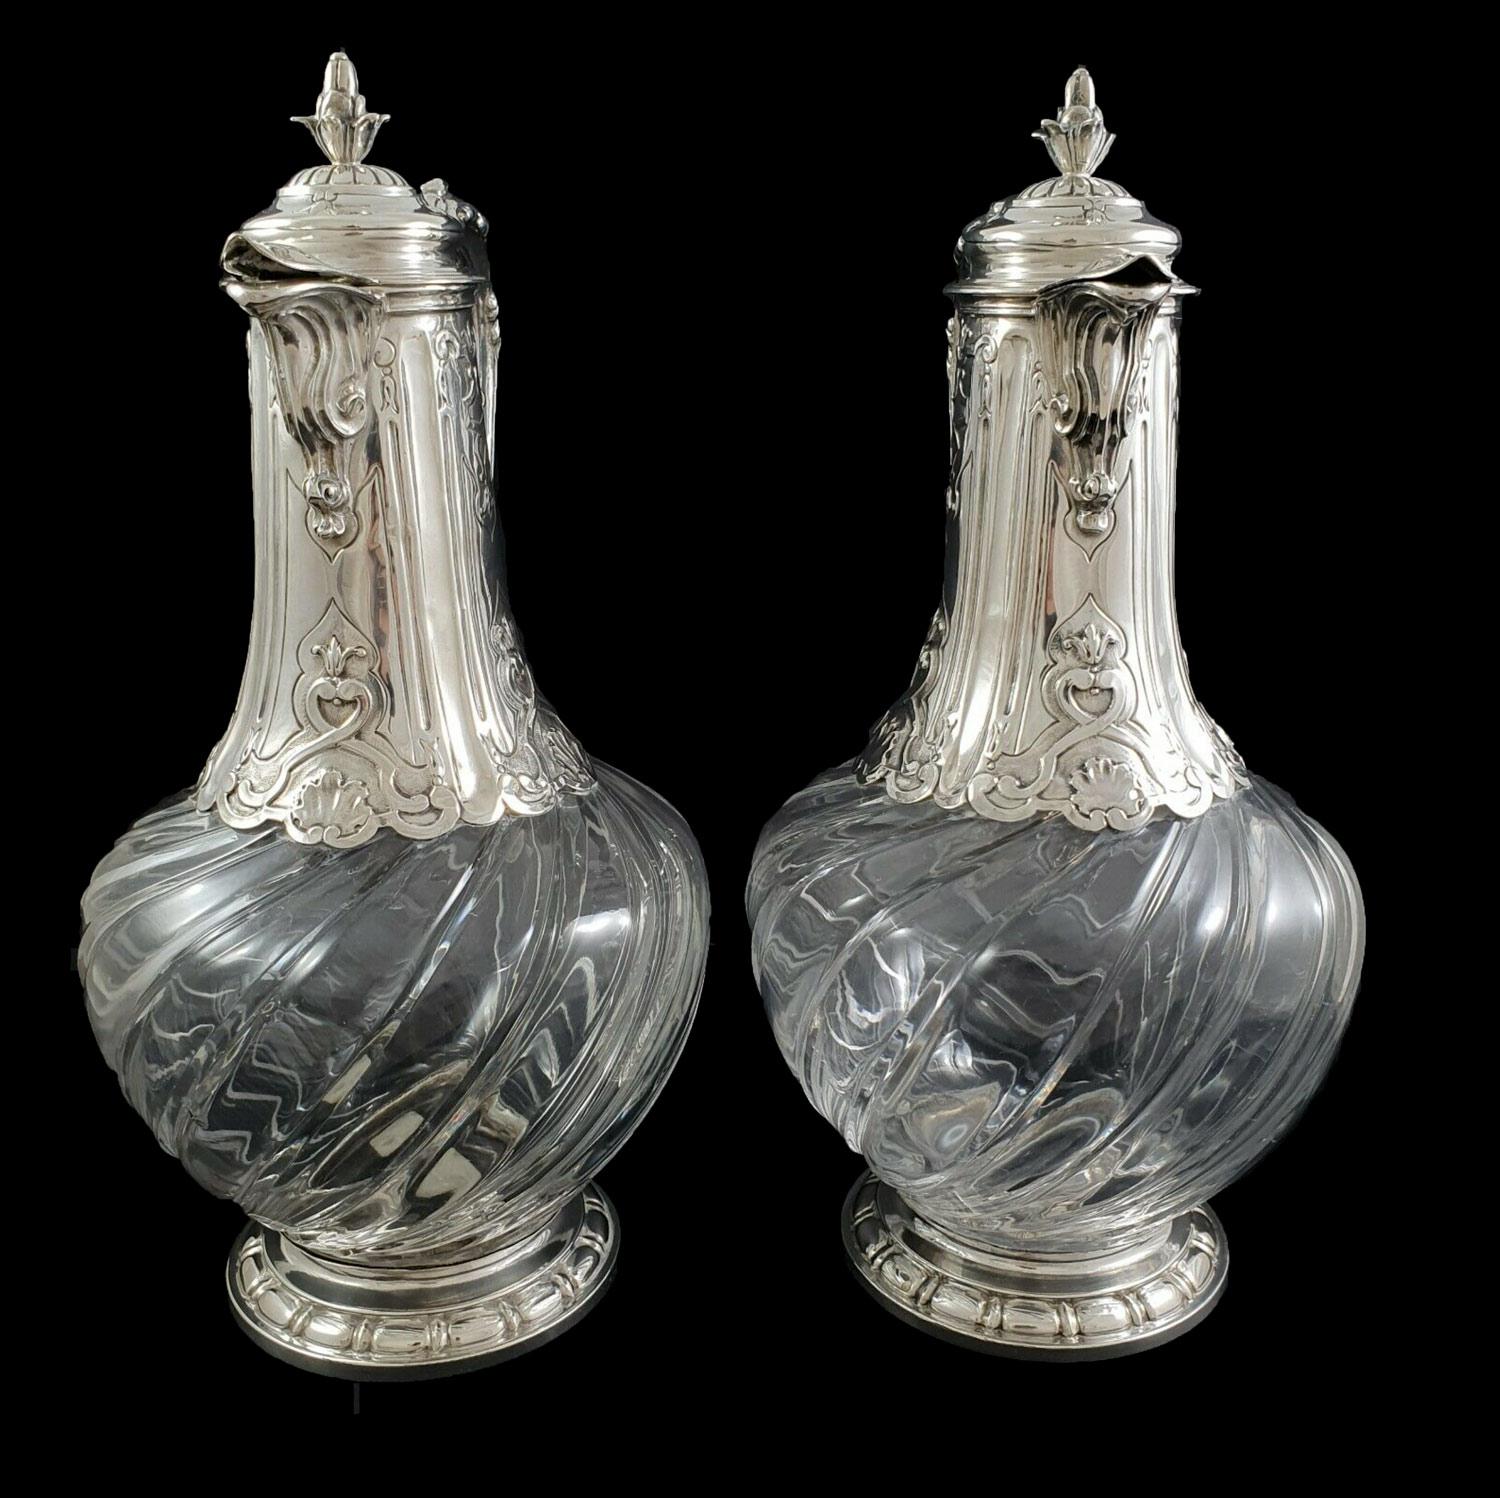 Pair of 19th-century typical french twisted and hand-engraved crystal ewers with sterling silver mount. Handle decorated with a dolphin head and acanthus leaves, high-part of the mount nicely chiseled and lid topped by a grenade knob. French silver